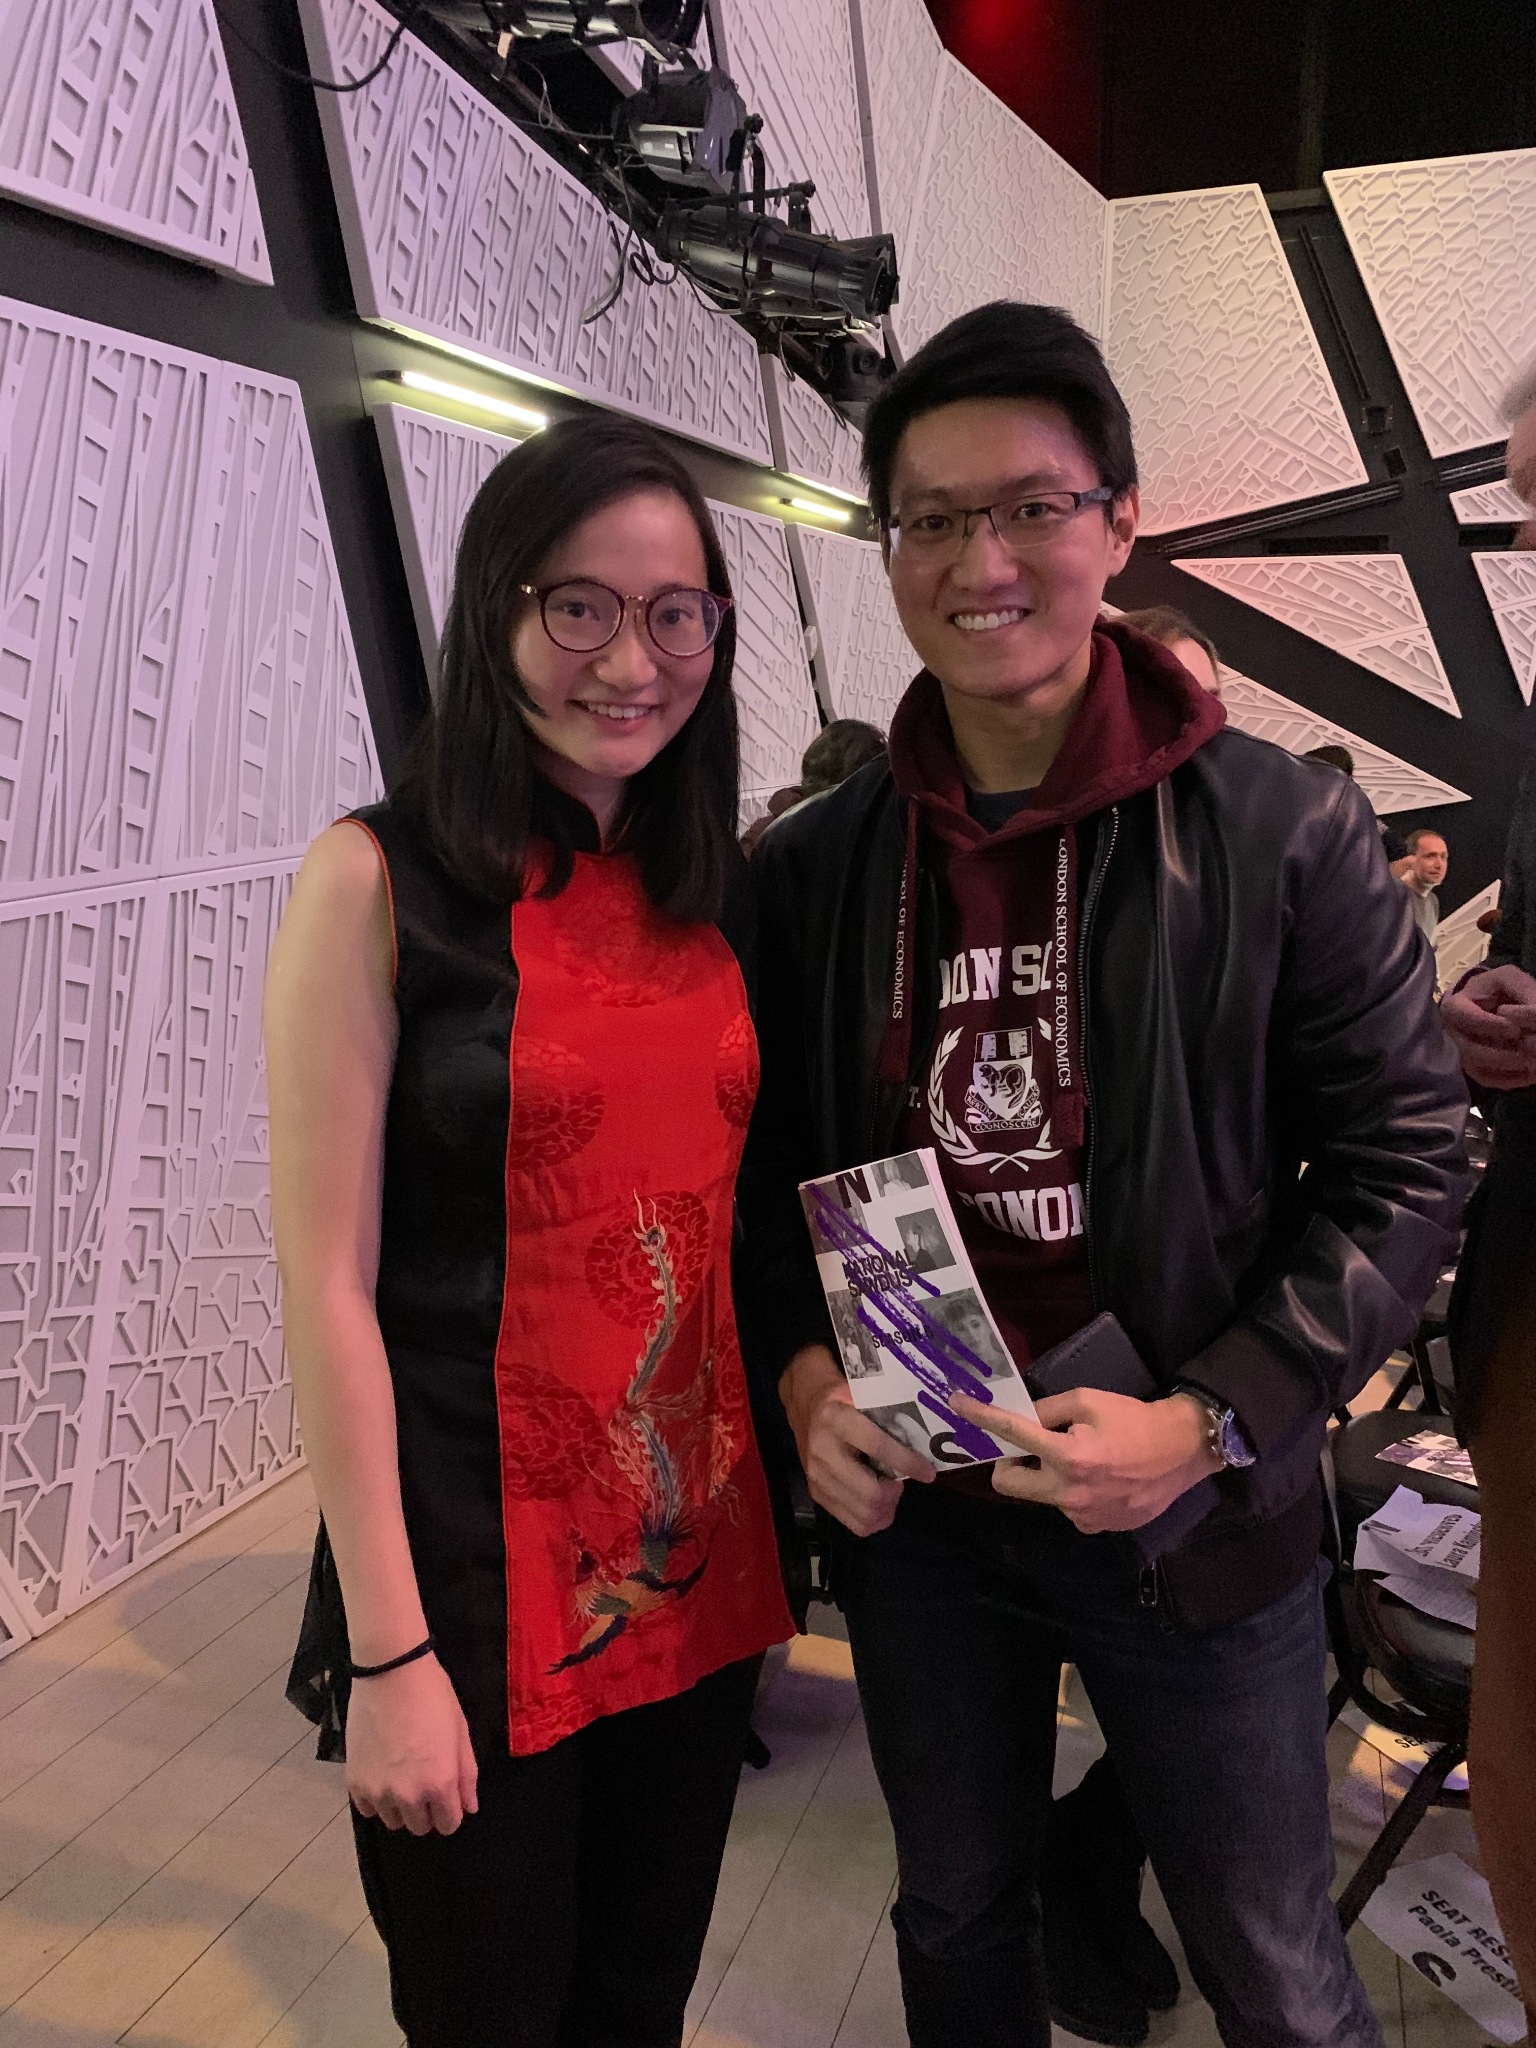 Cheng Jin and her brother at a concert venue